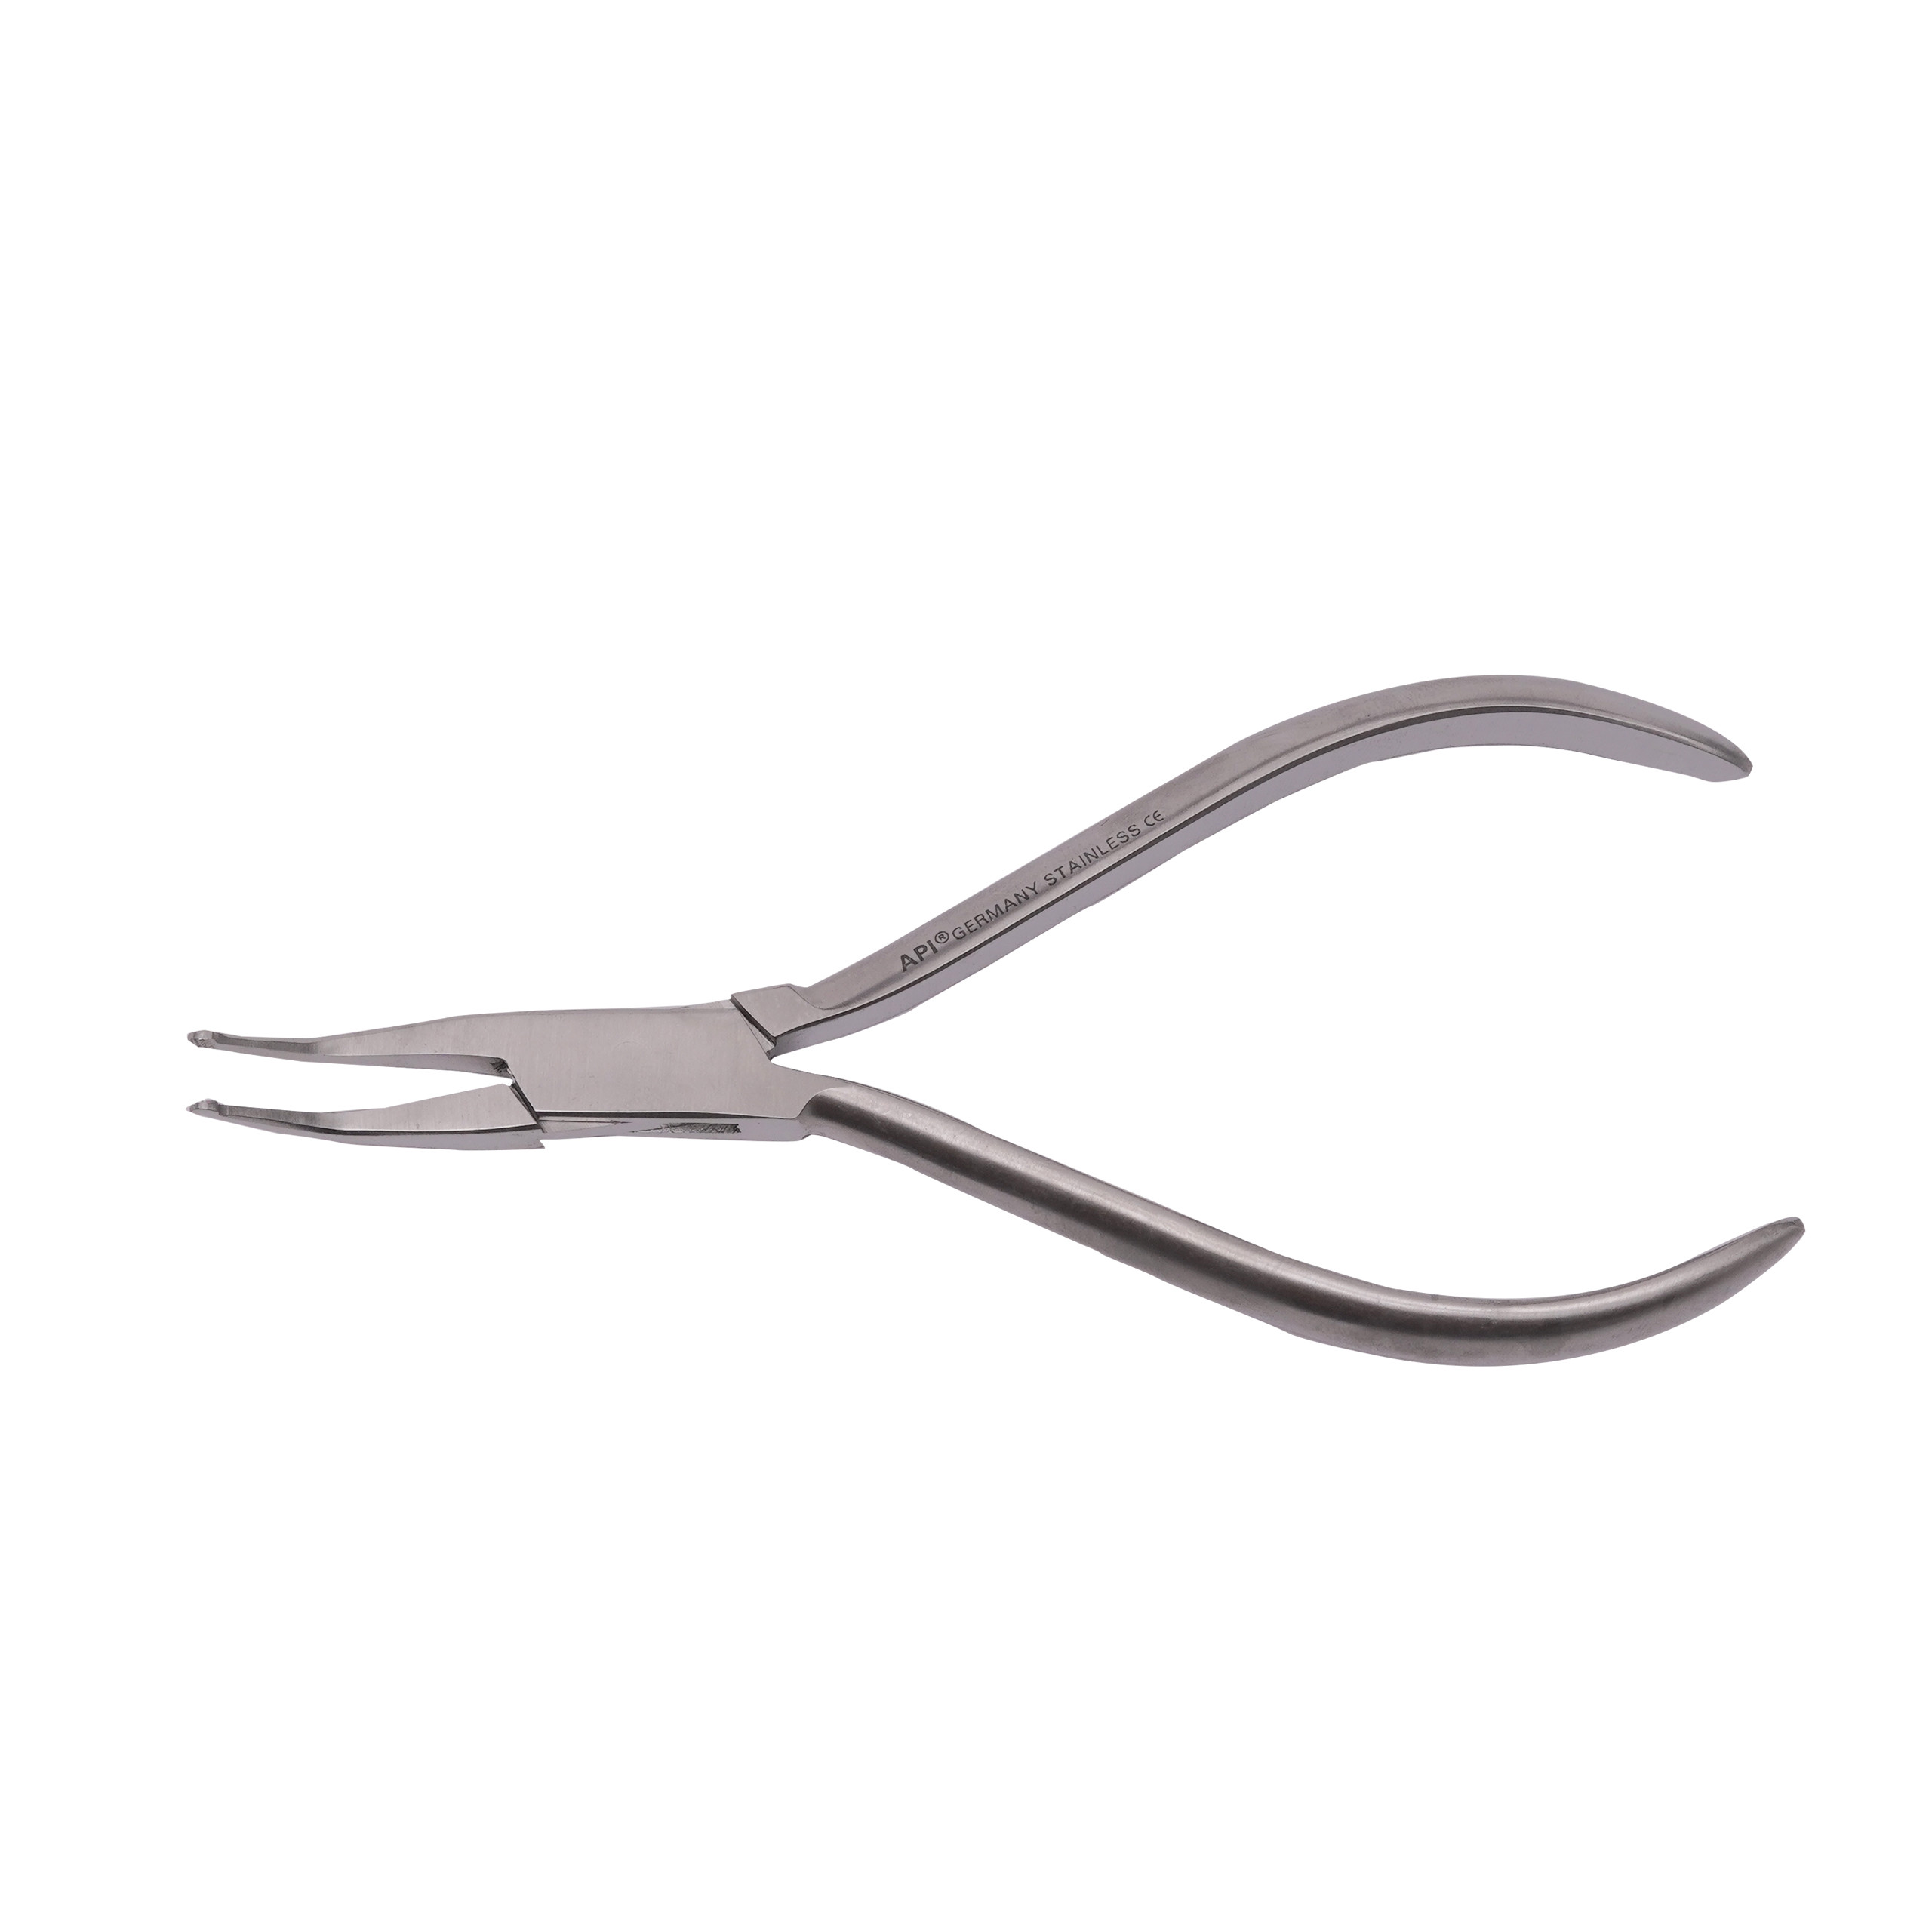 API Hoe Pliers (Curved+Straight)